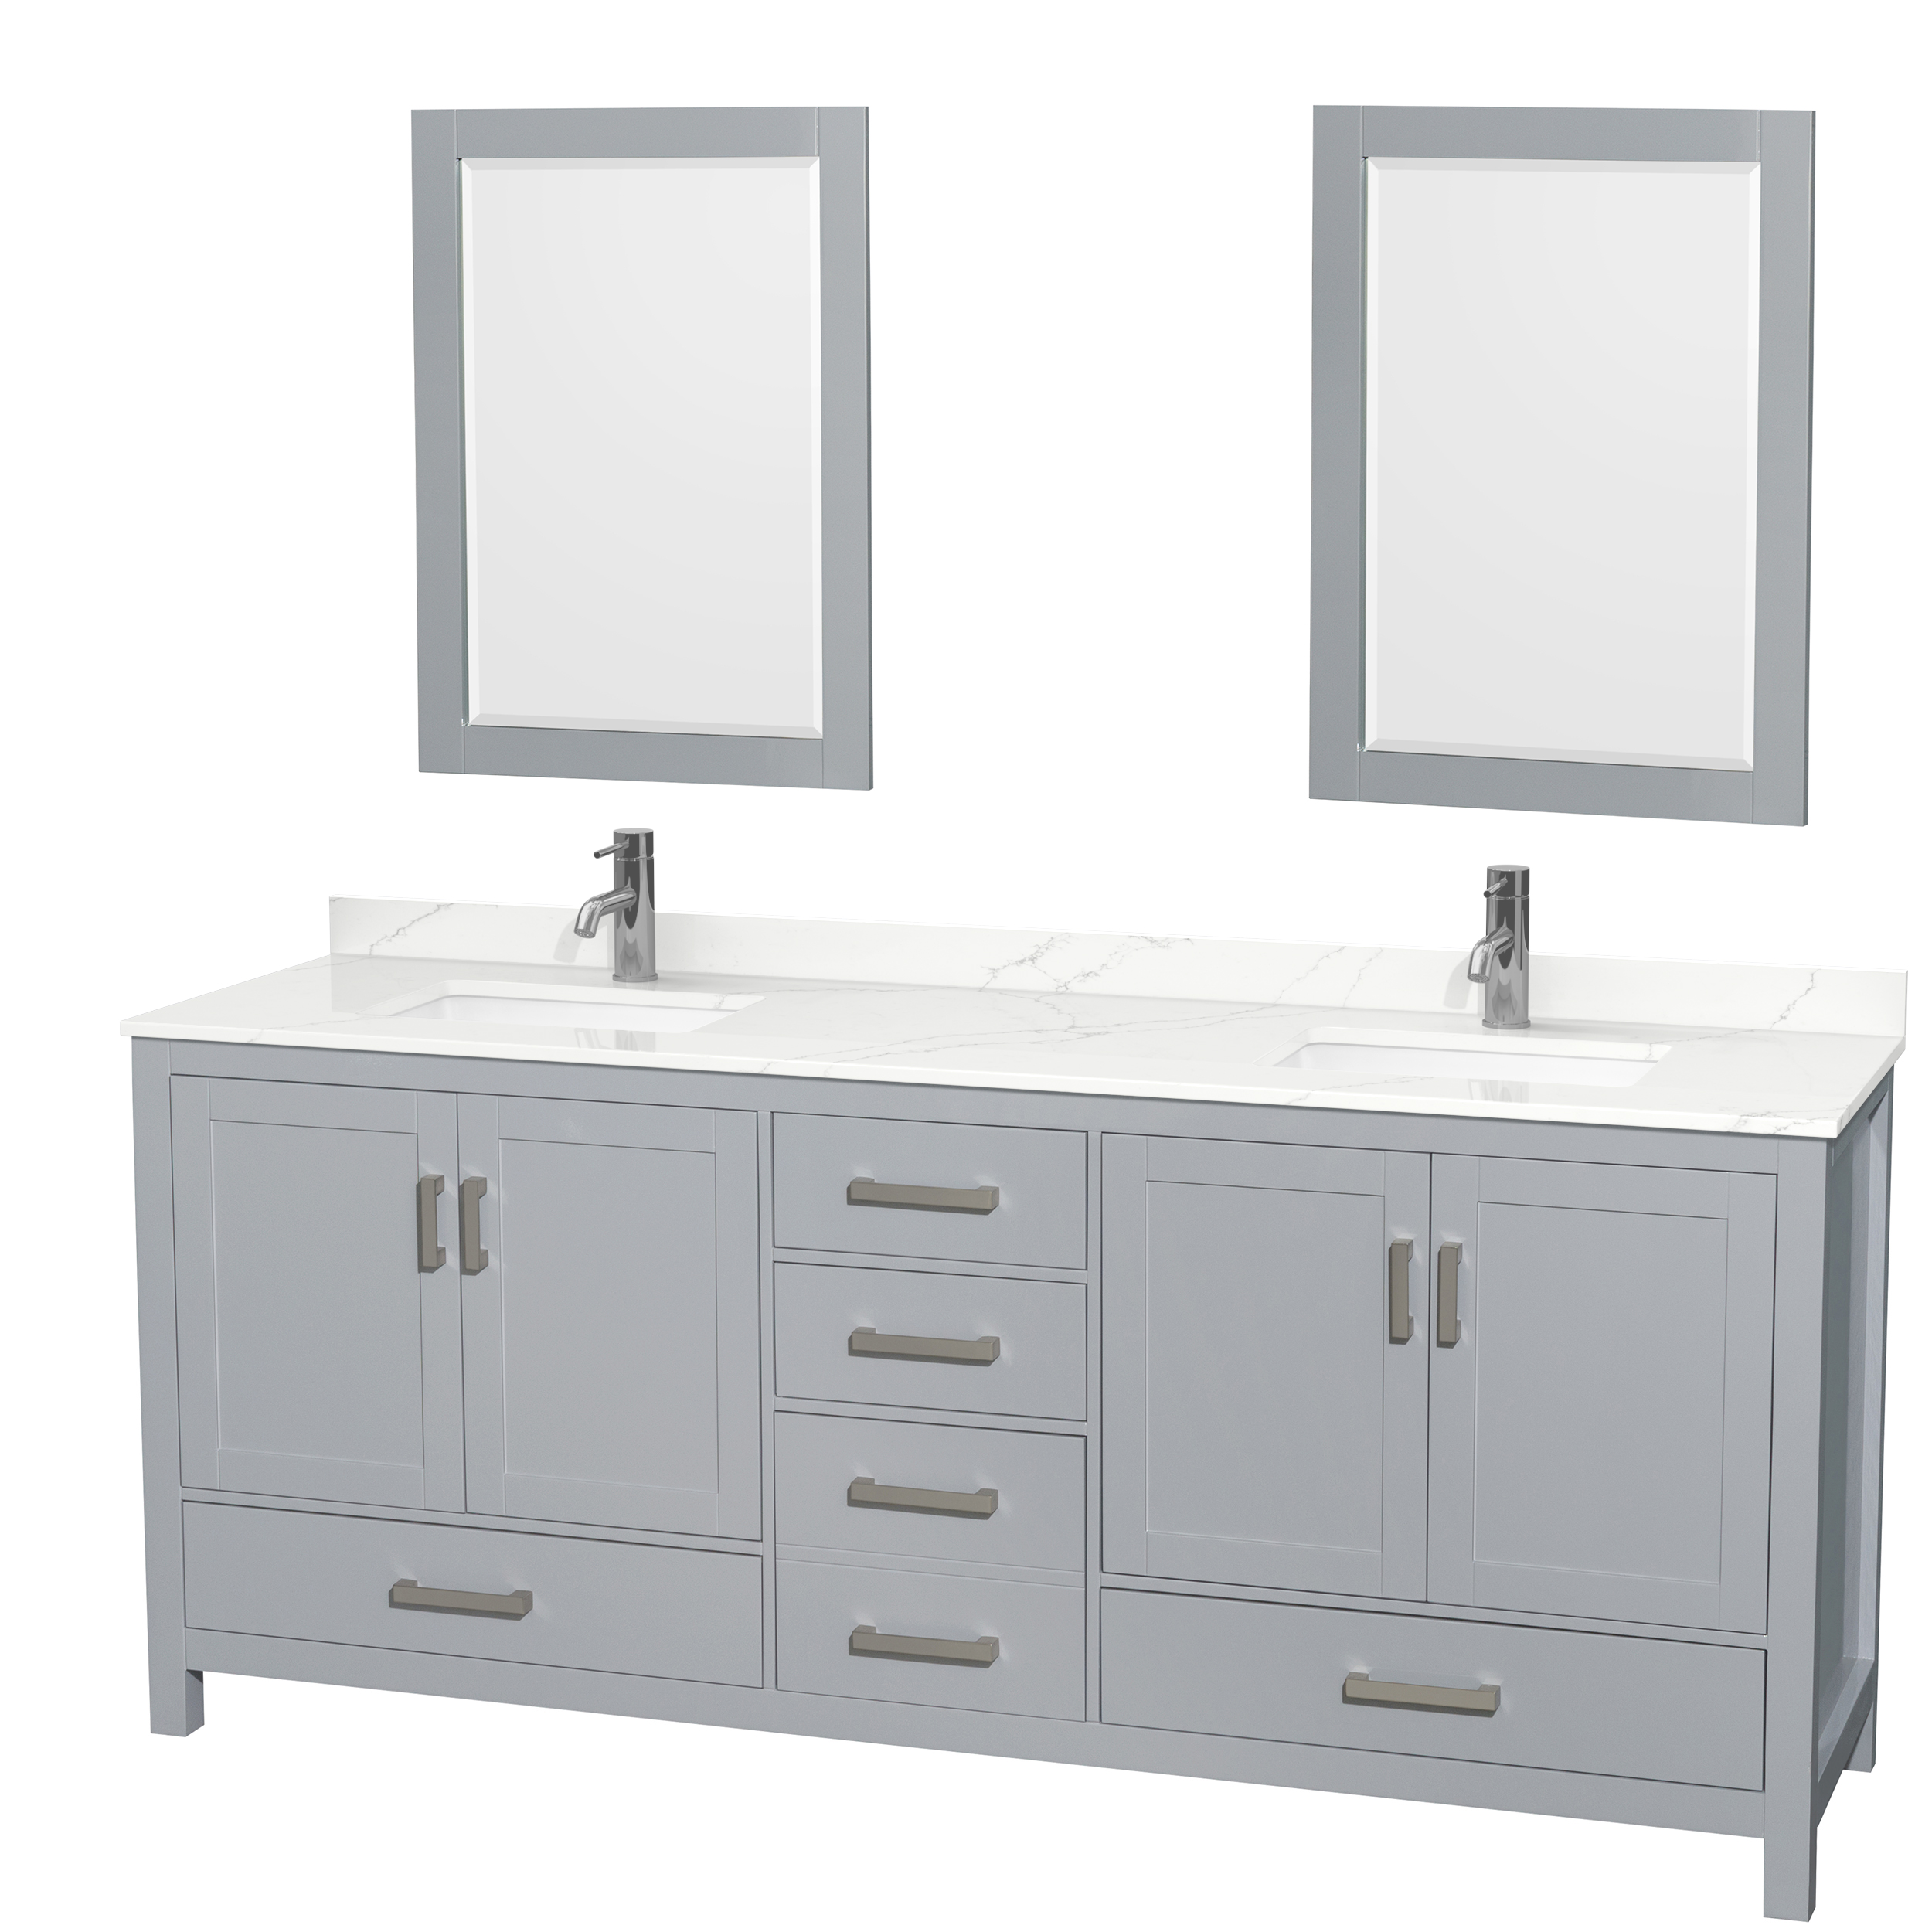 Sheffield 80" Double Bathroom Vanity by Wyndham Collection - Gray WC-1414-80-DBL-VAN-GRY-